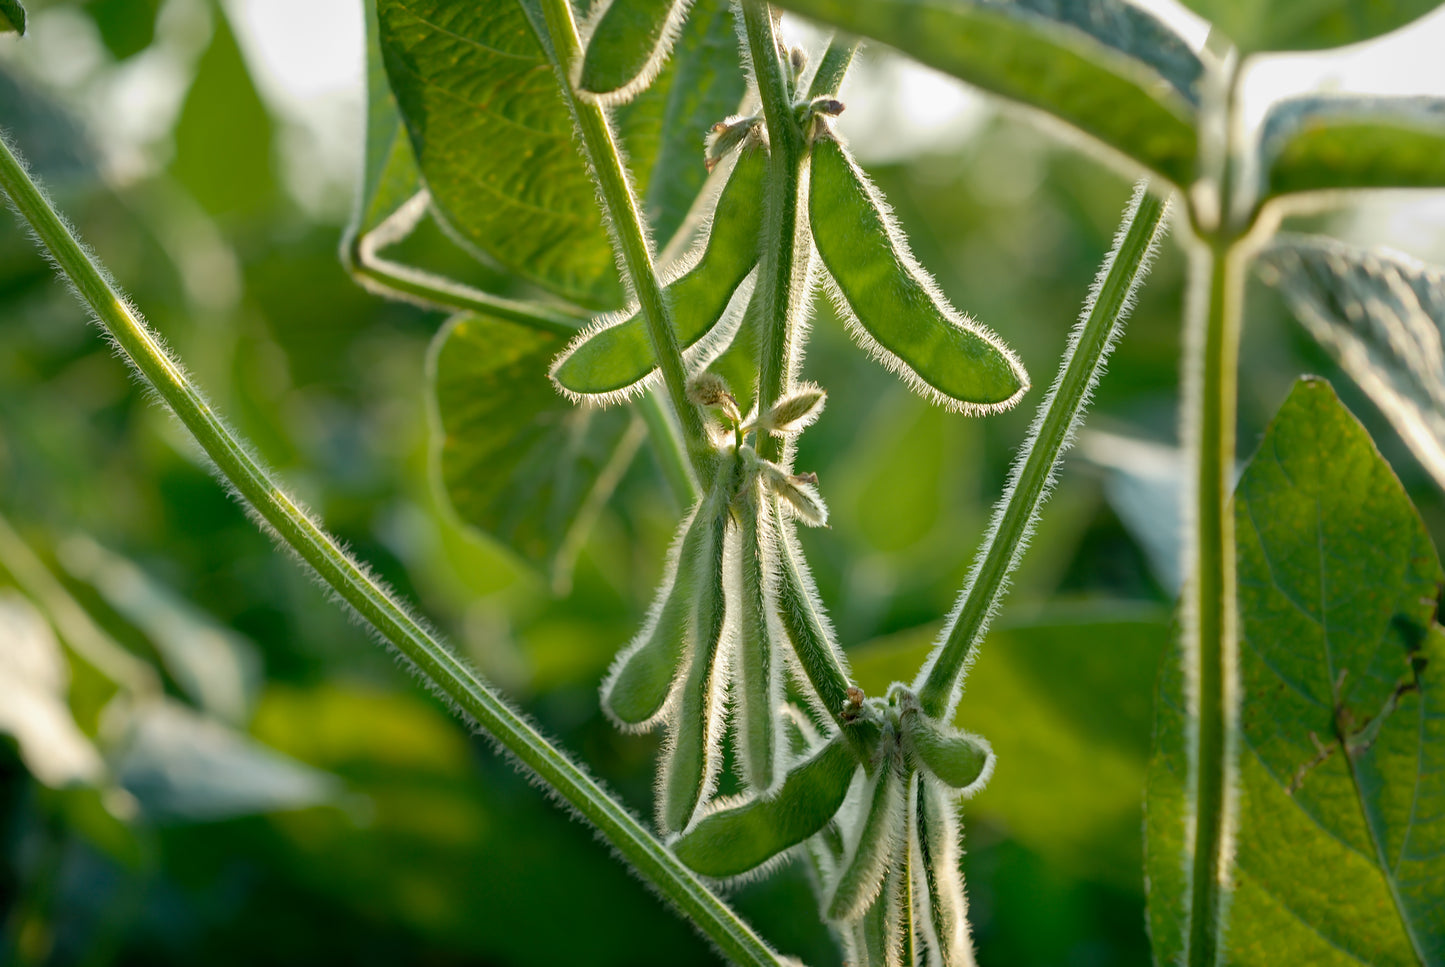 Soybeans - Conventional - 5 lb